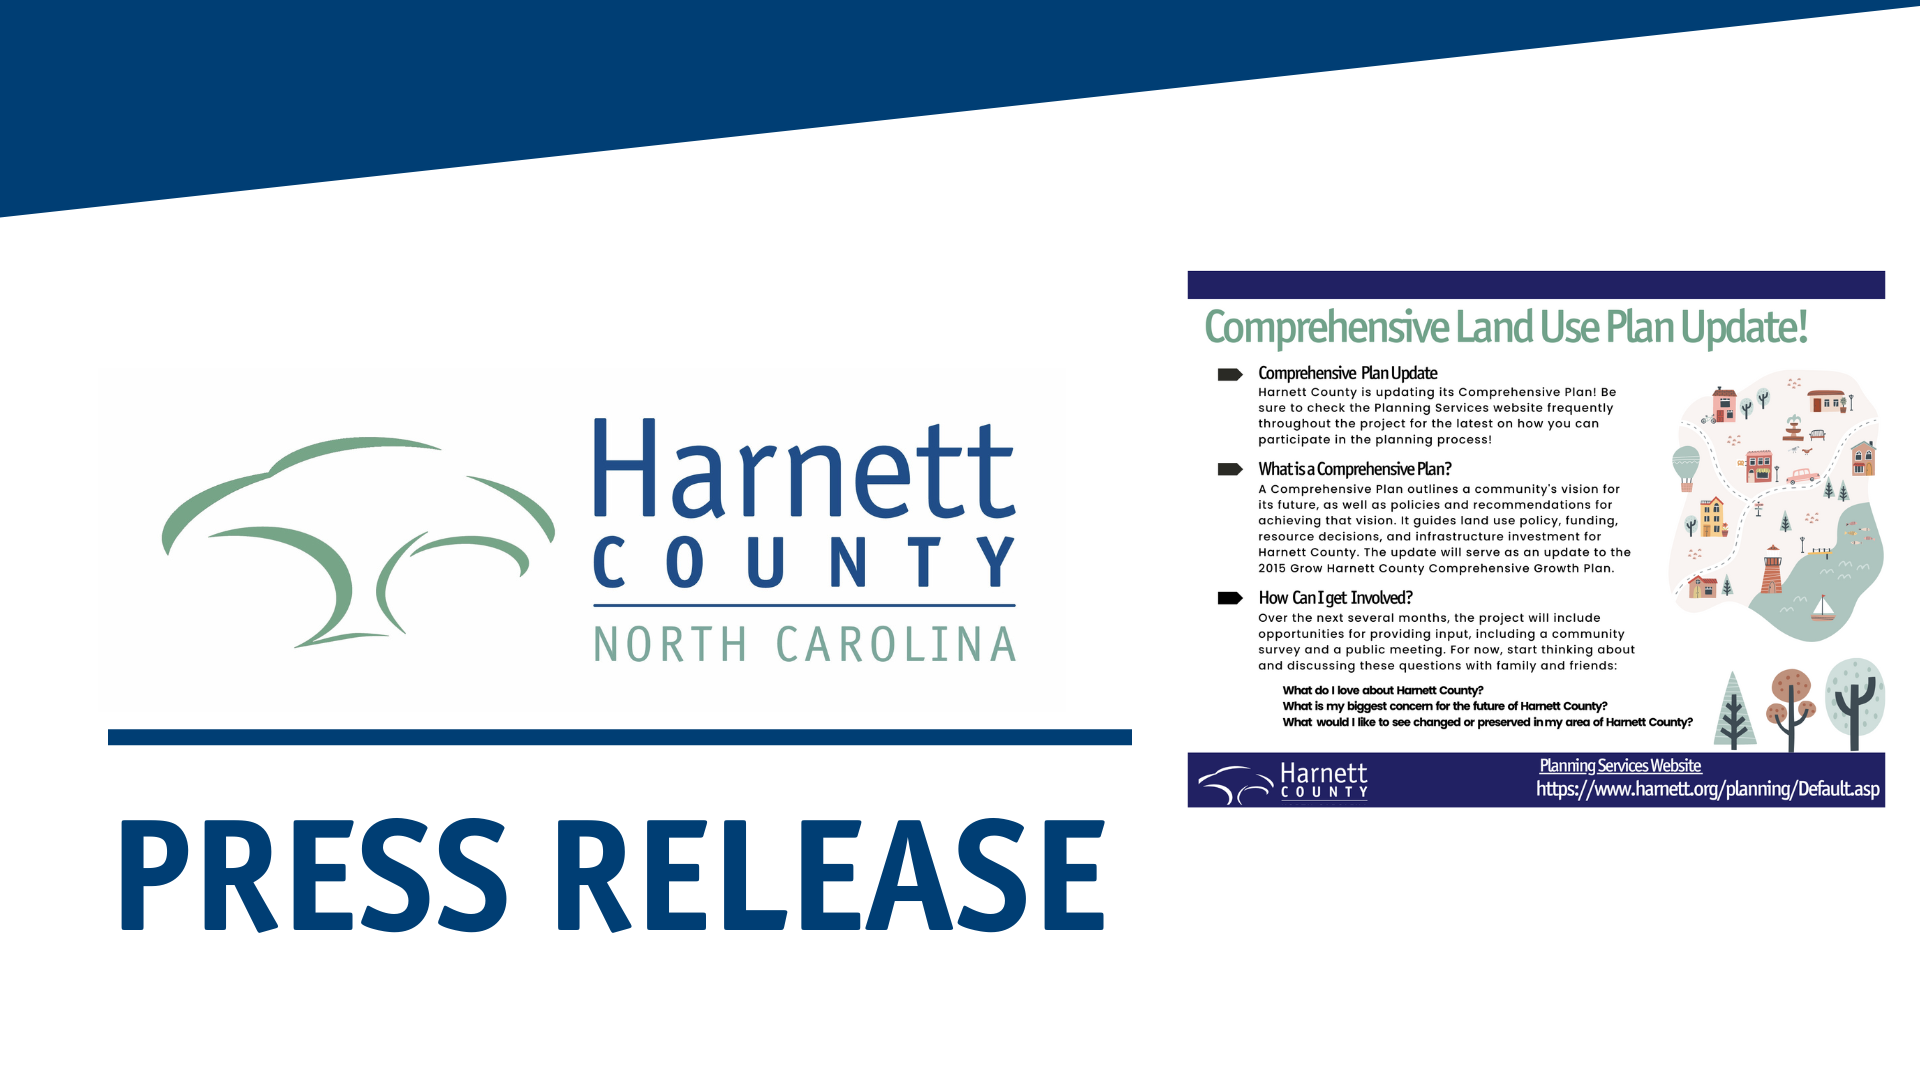 Harnett County to update Comprehensive Land Use Plan